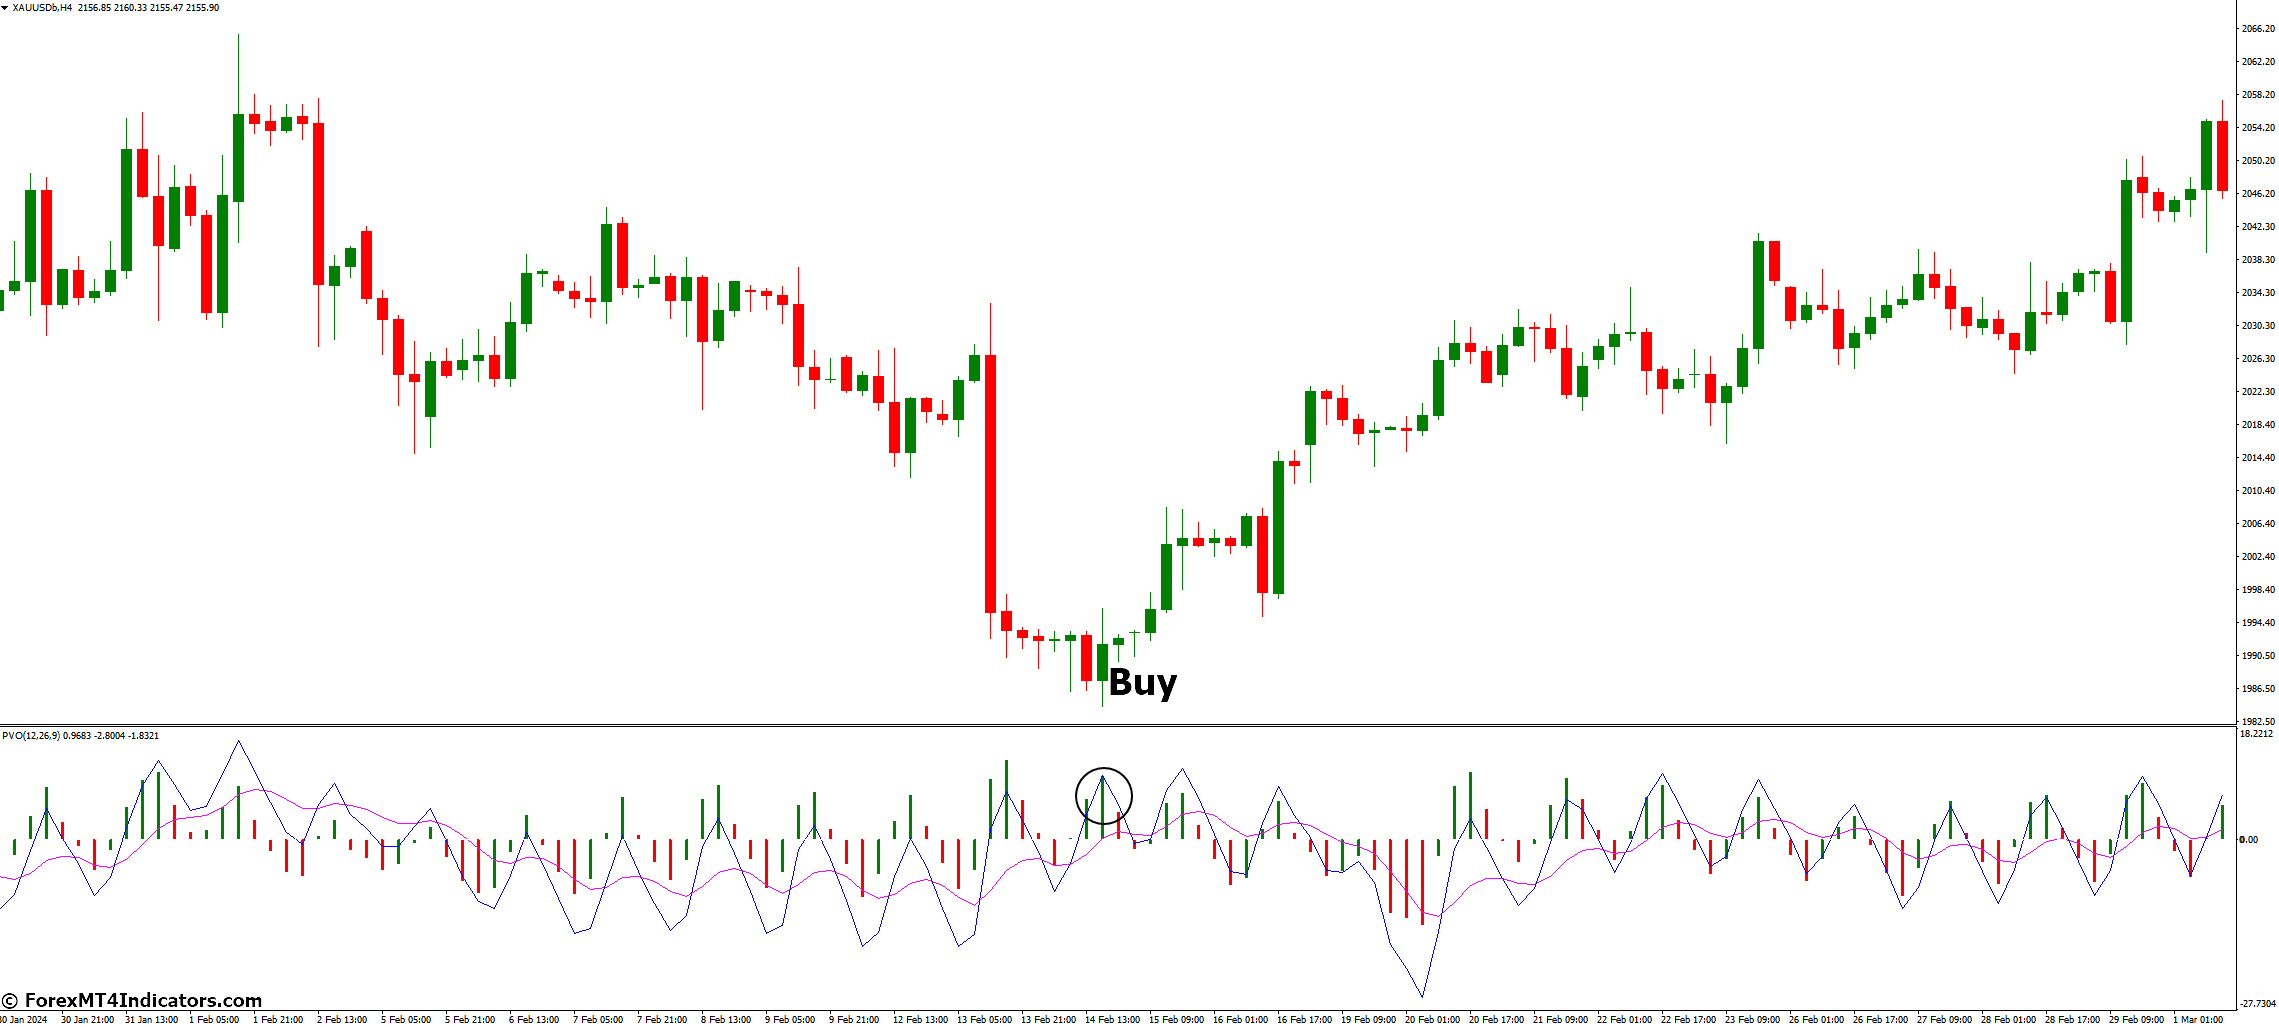 How to Trade with Percentage Volume Oscillator Indicator - Buy Entry